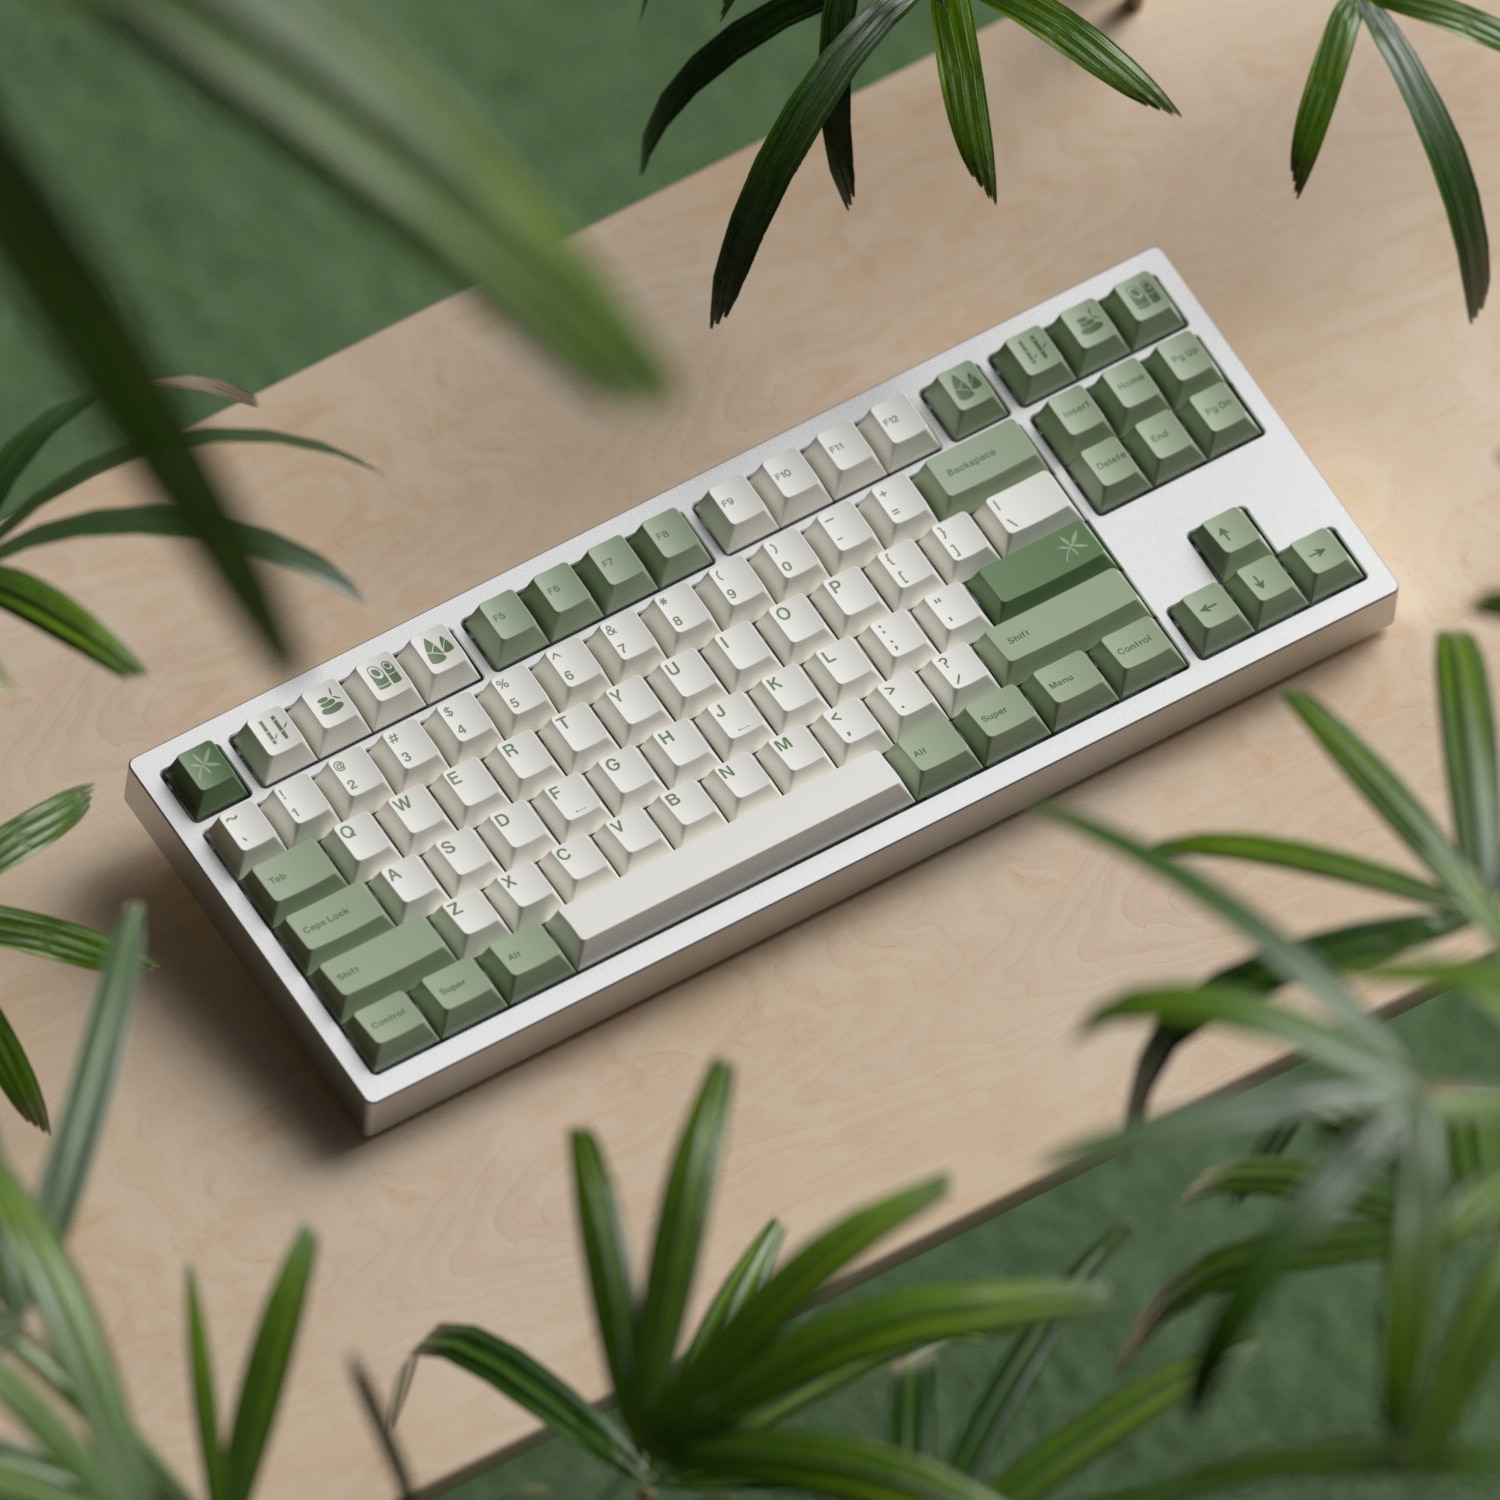 1 Set Bamboo Forest Keycaps PBT Dye Subbed Key Caps Cherry Profile Warm White Keycap For - GMK Keycap